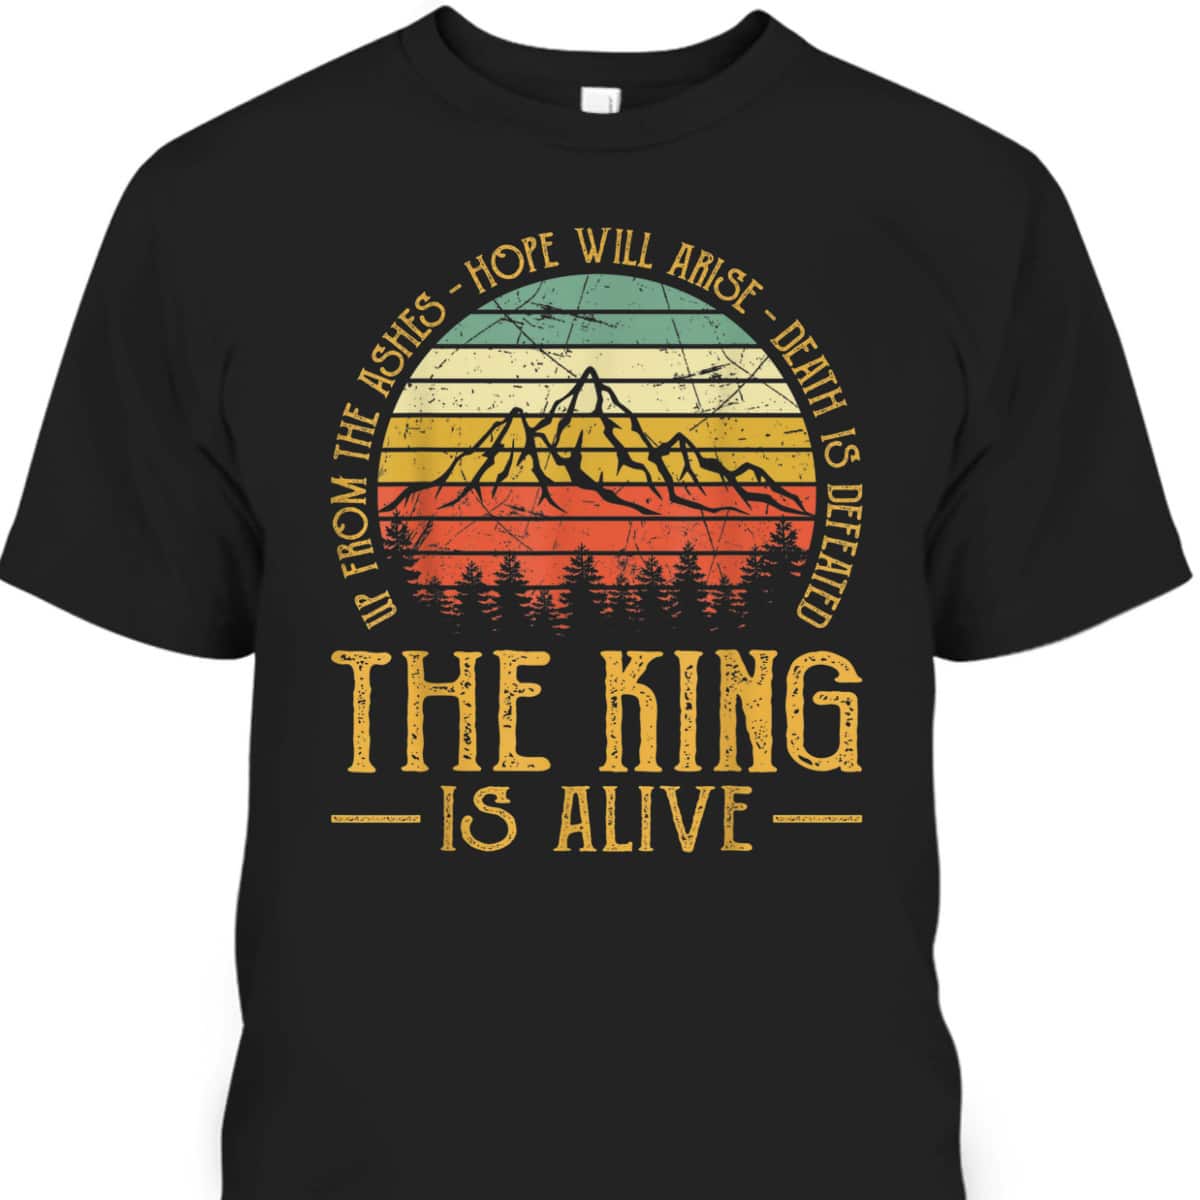 Up From The Ashes Hope Will Arise Christian Faith T-Shirt The King Is Alive